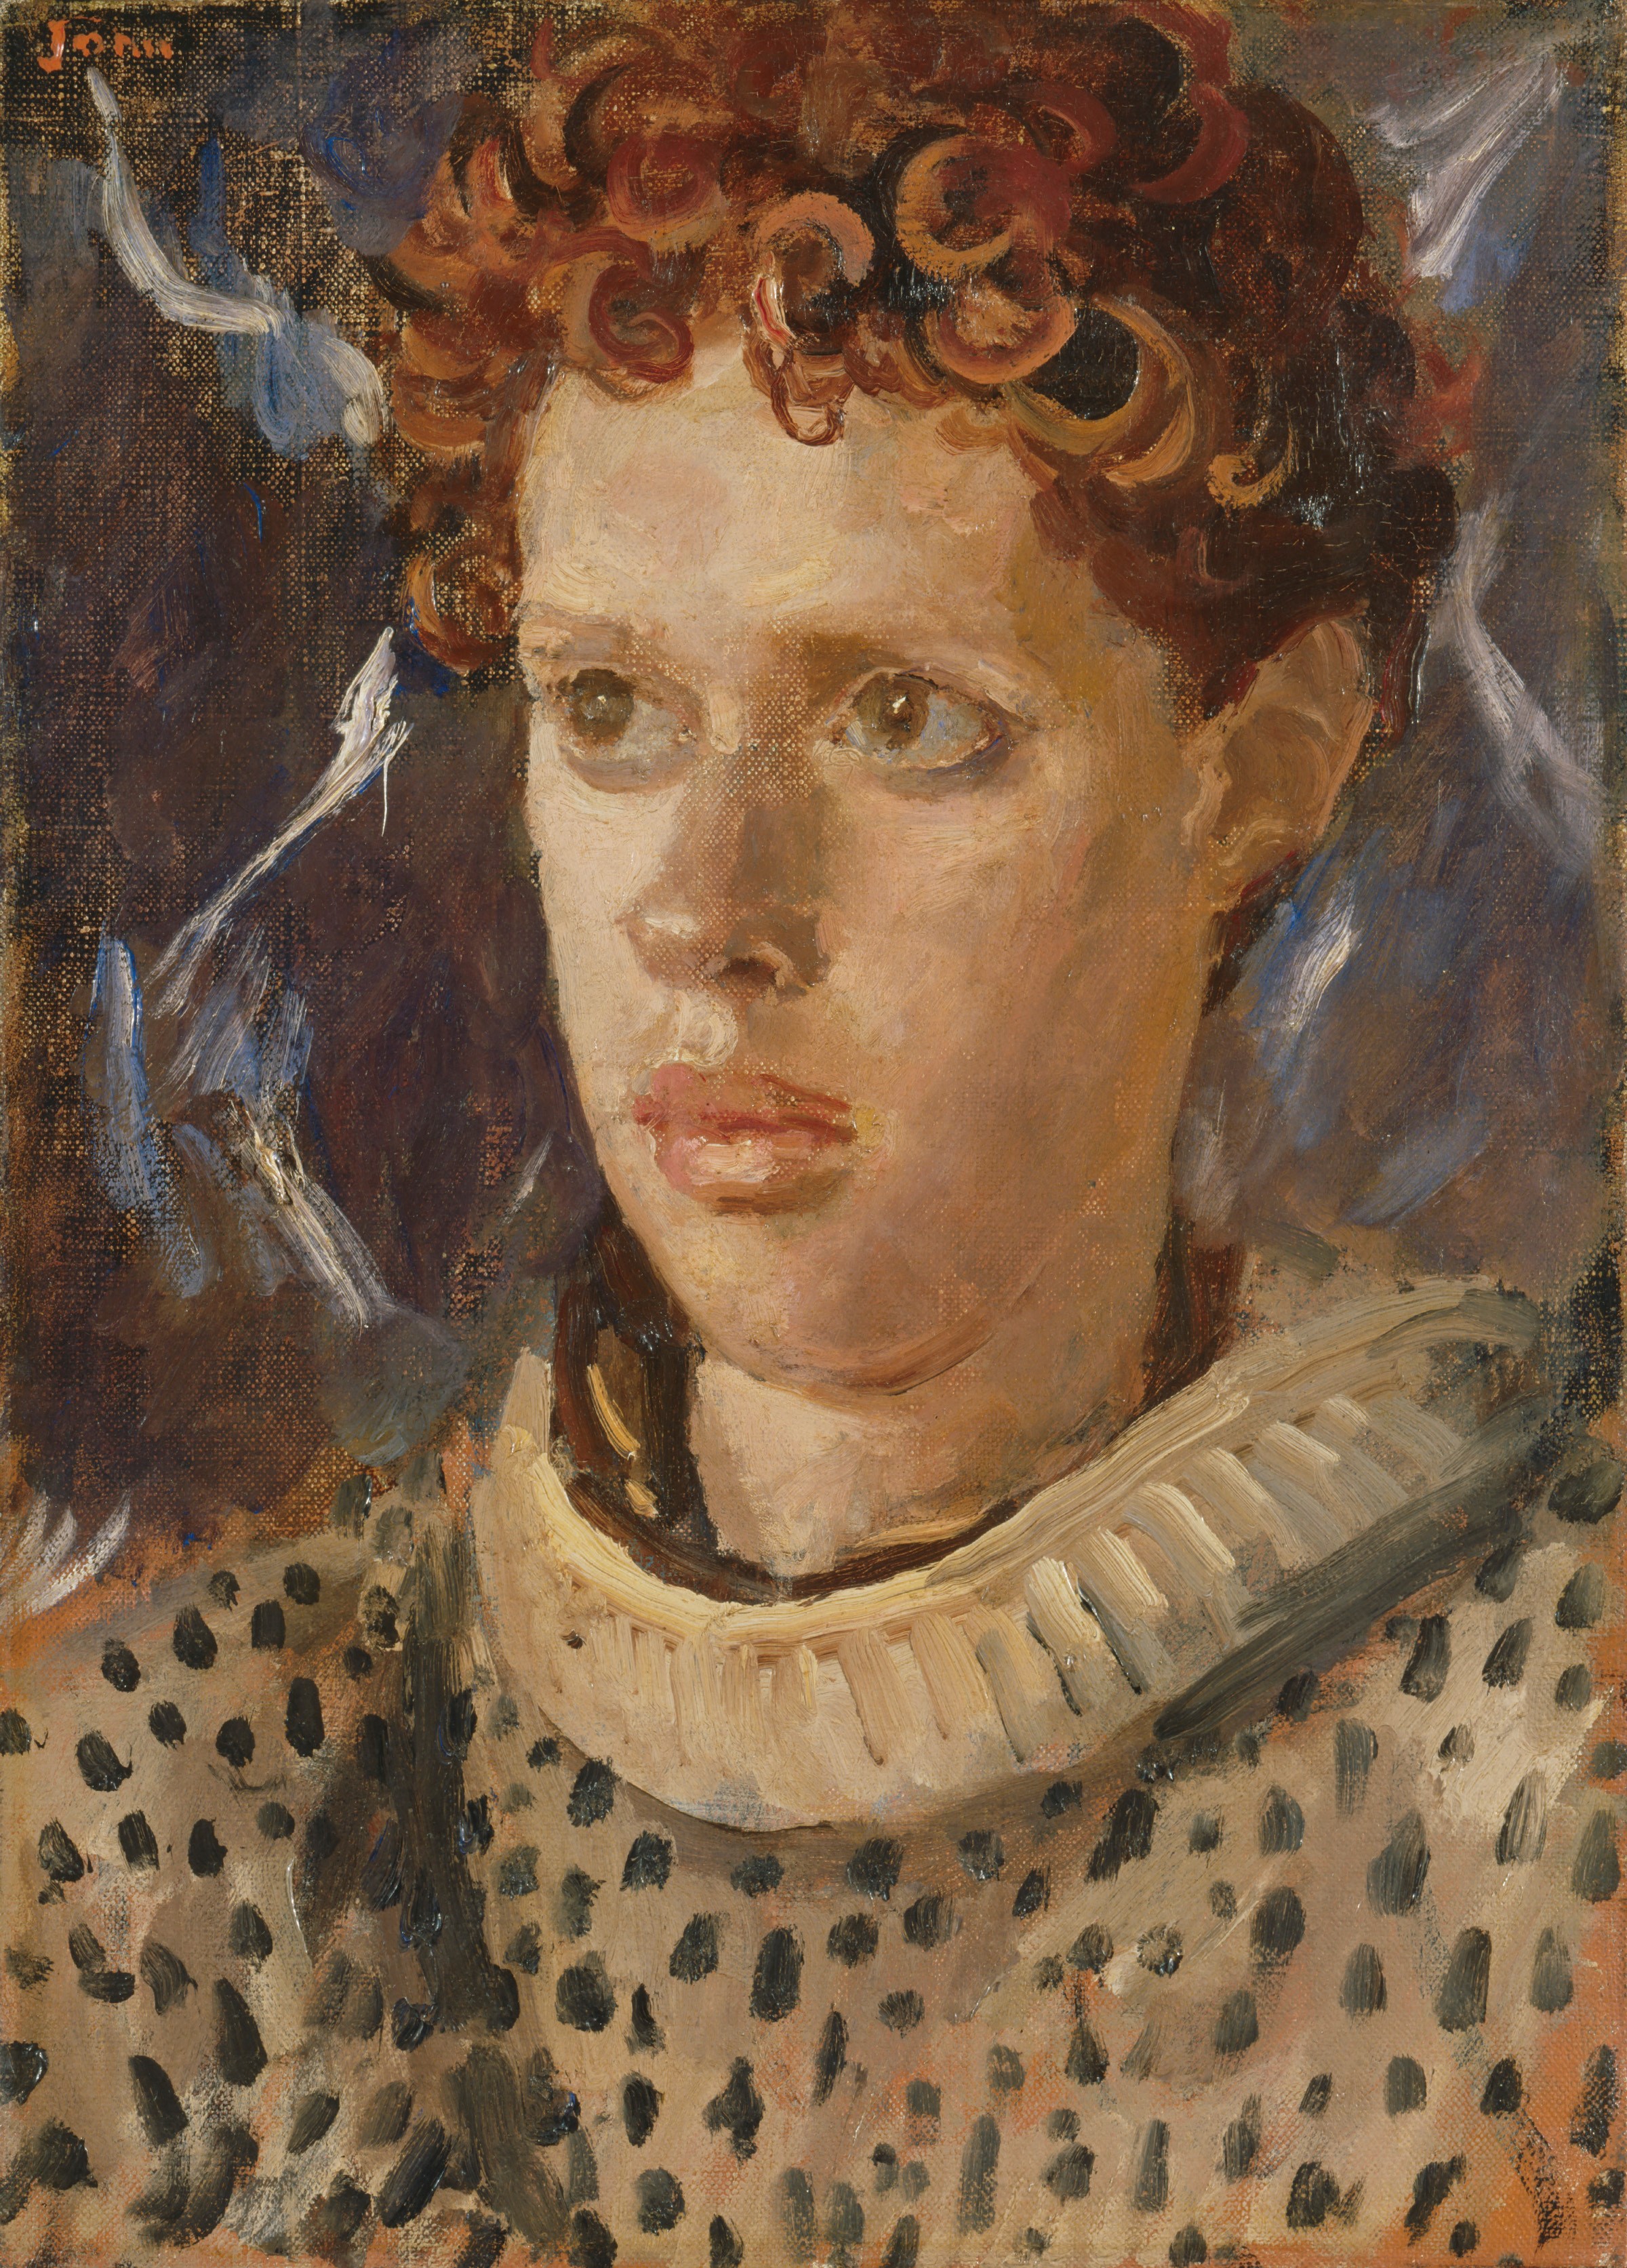 A portrait of Dylan Thomas by August John (National Portrait Gallery)